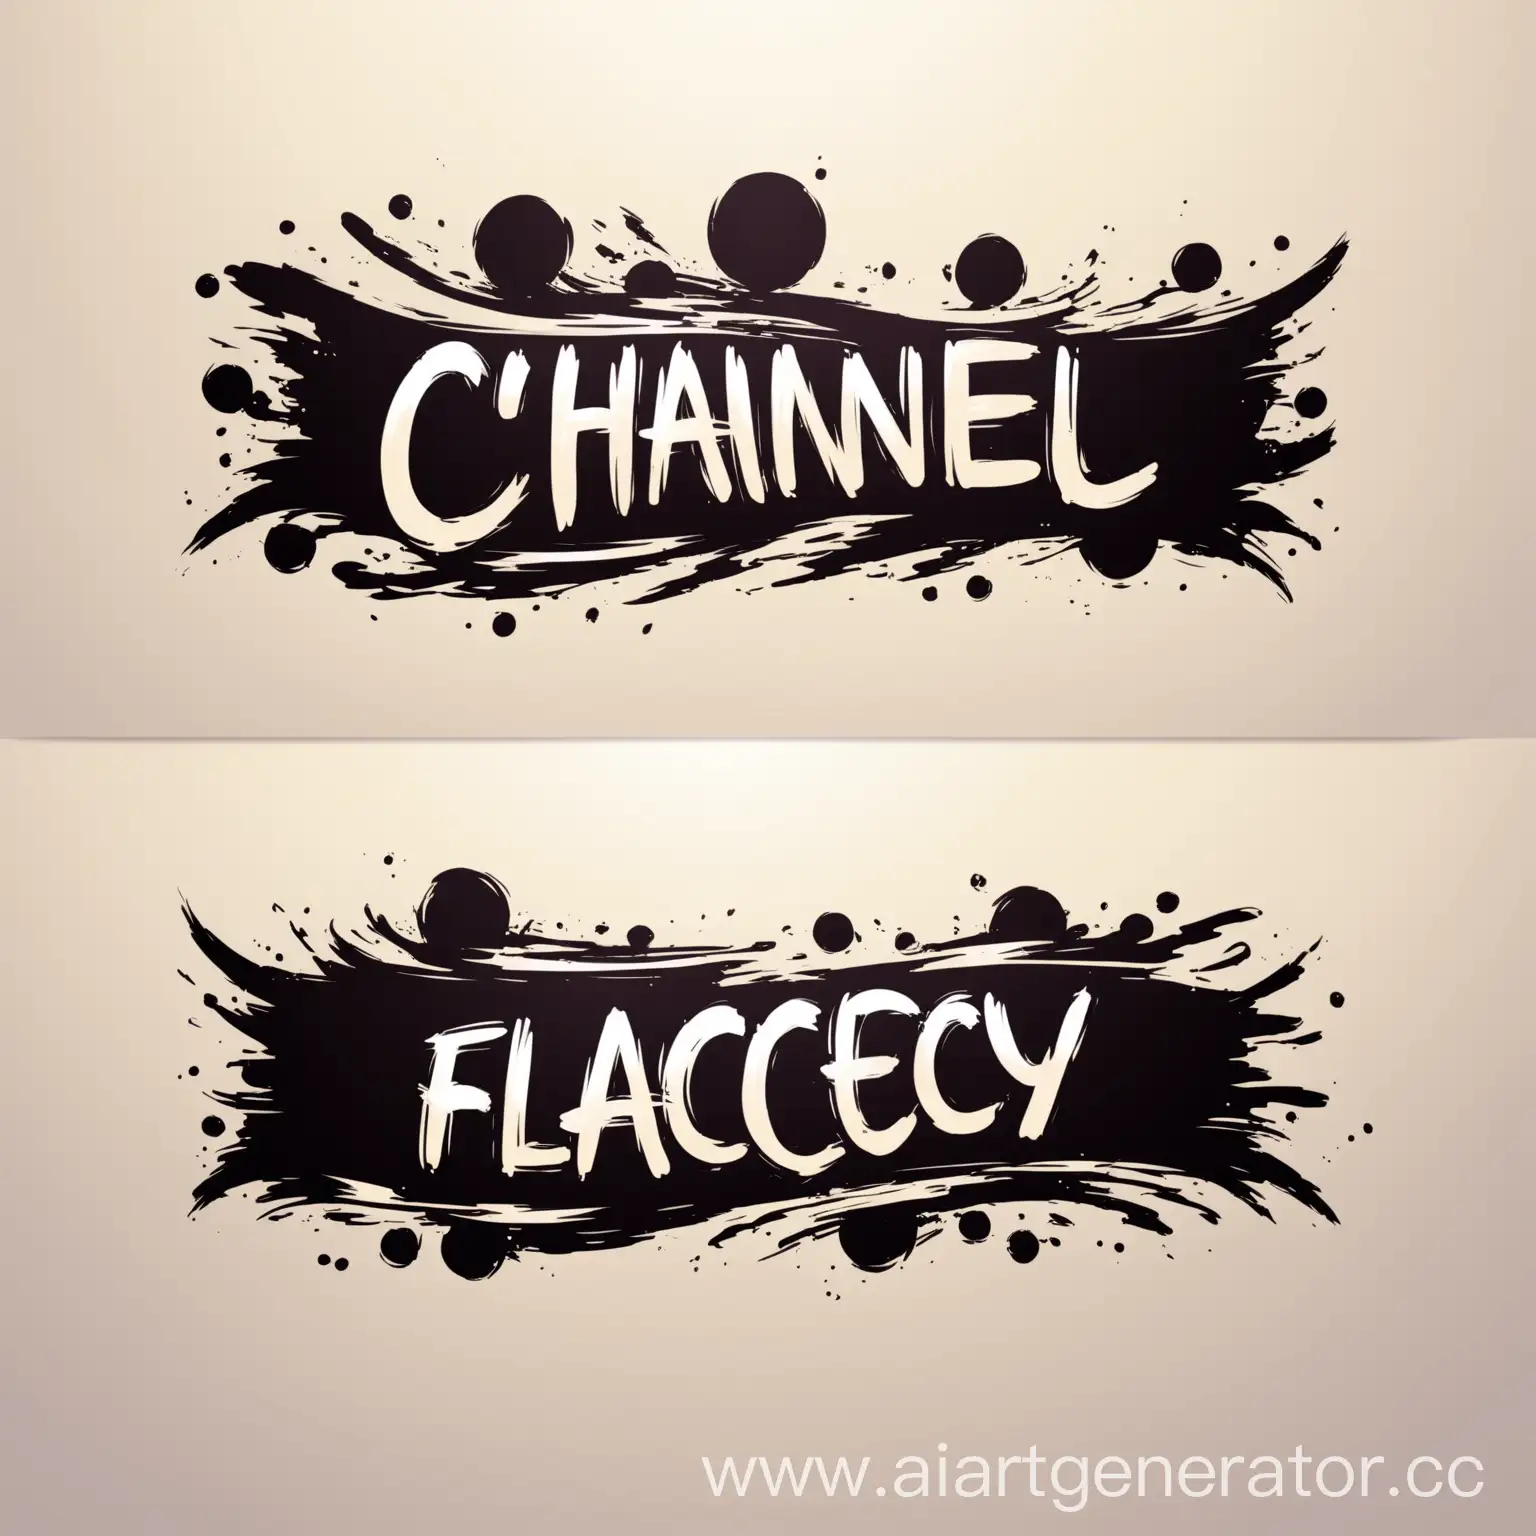 Dynamic-Flaccy-Banner-Channel-with-Black-Silhouette